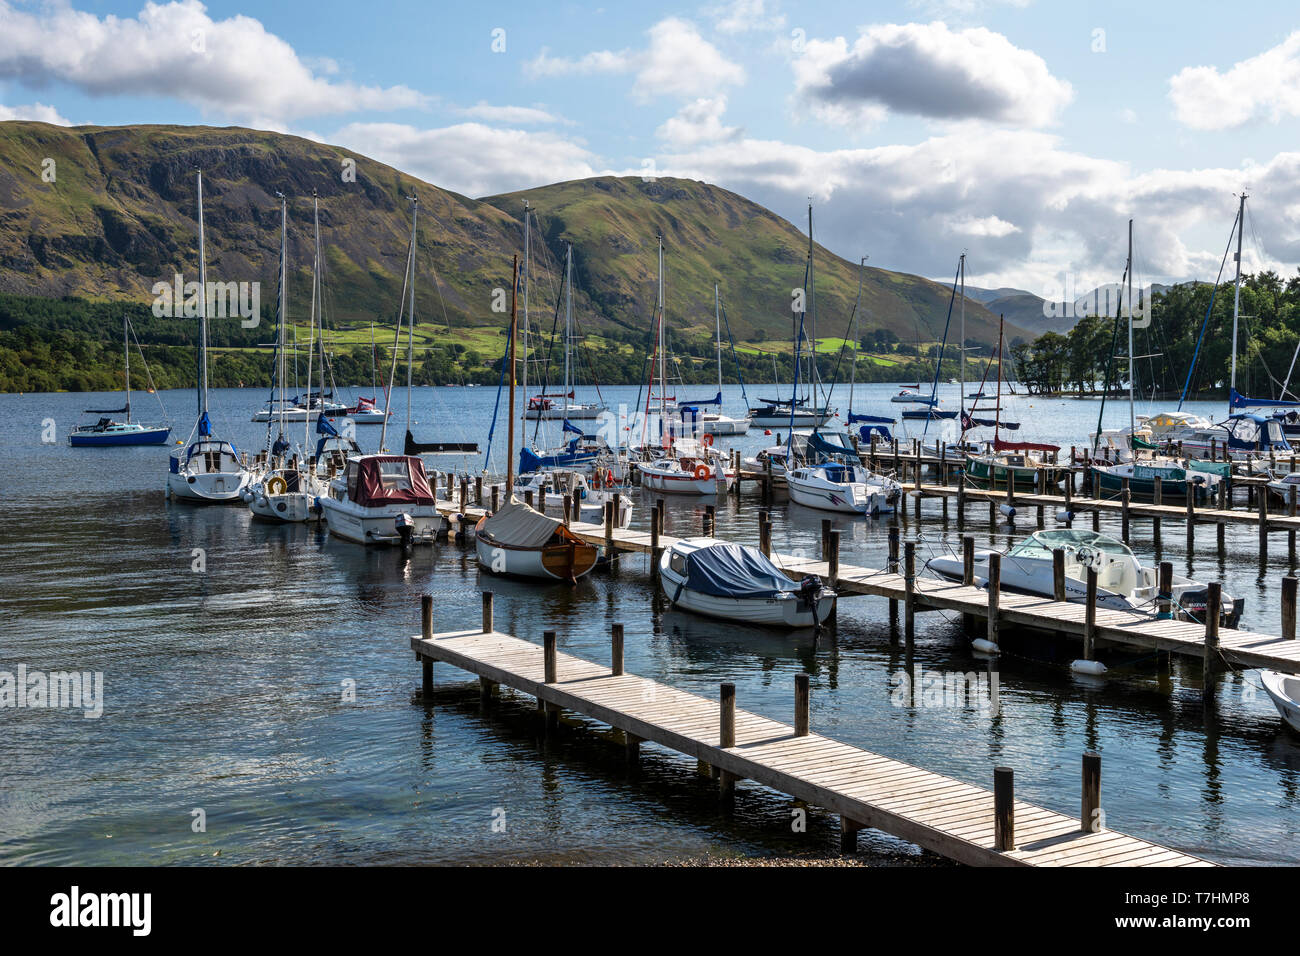 Yachts moored on pontoons at Fair Field Marina on Ullswater in the Lake District National Park, Cumbria, England, UK Stock Photo